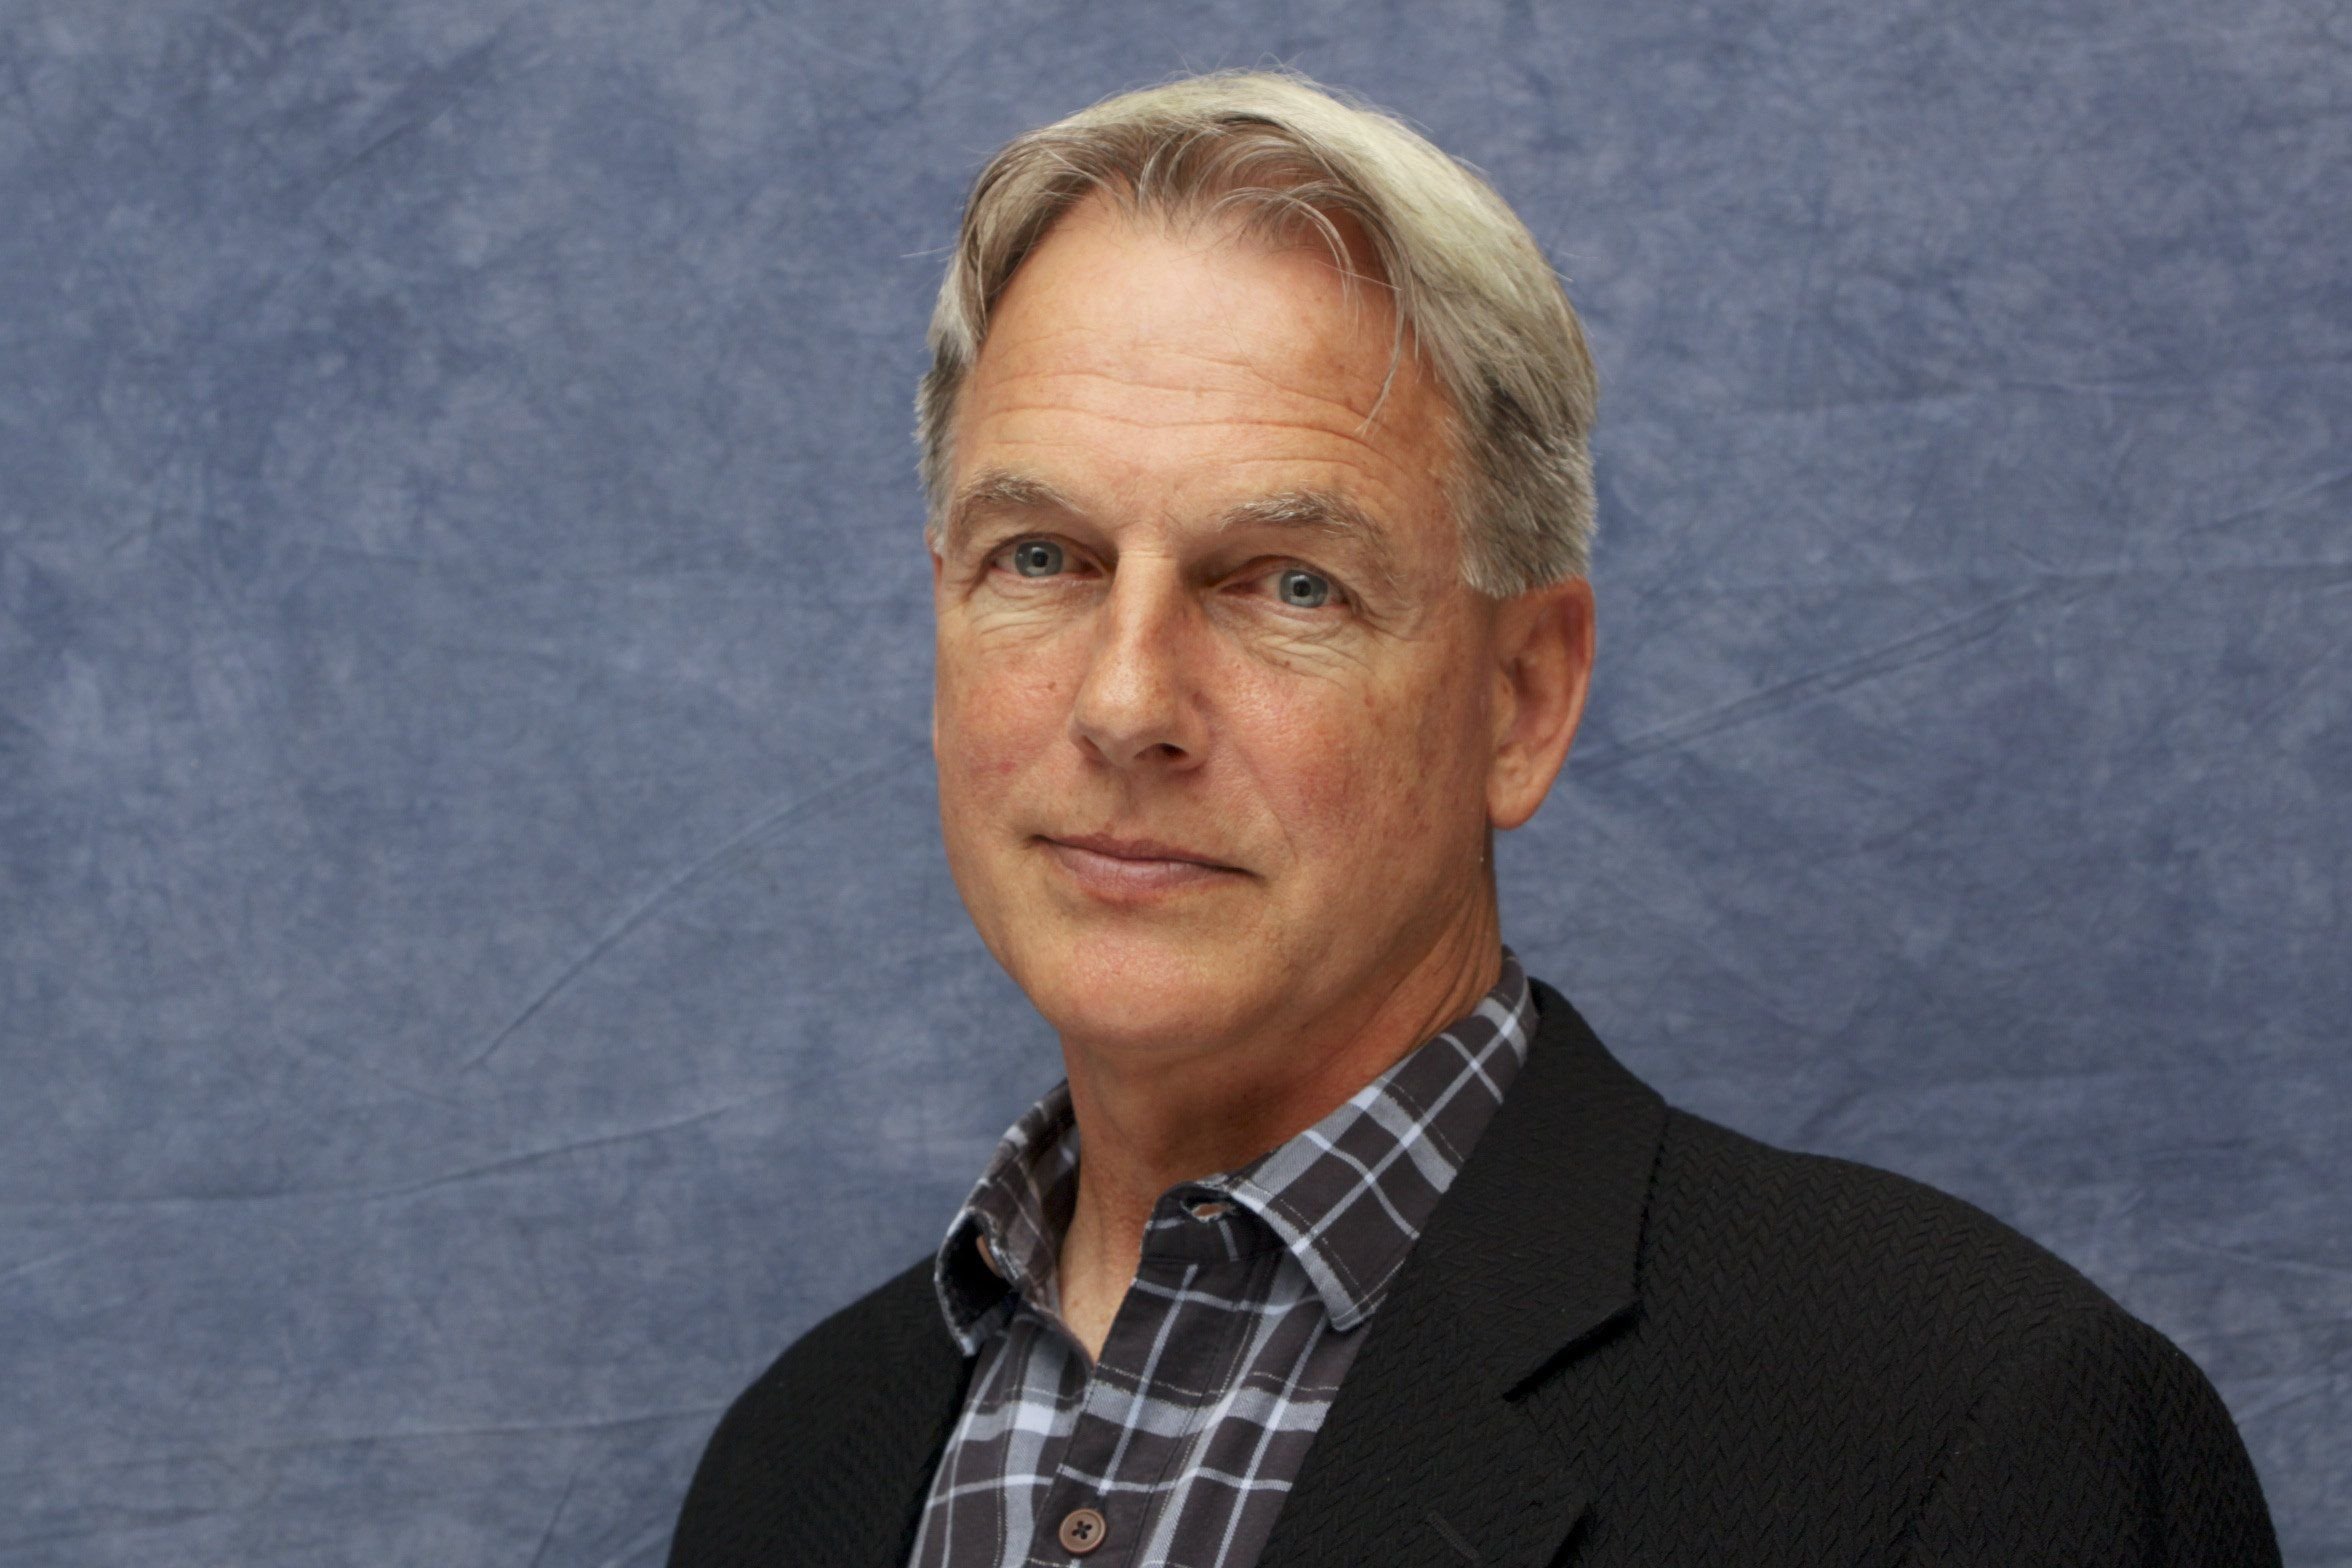 Mark Harmon at the Four Seasons Hotel in Beverly Hills, California, on April 22, 2009 | Source: Getty Images